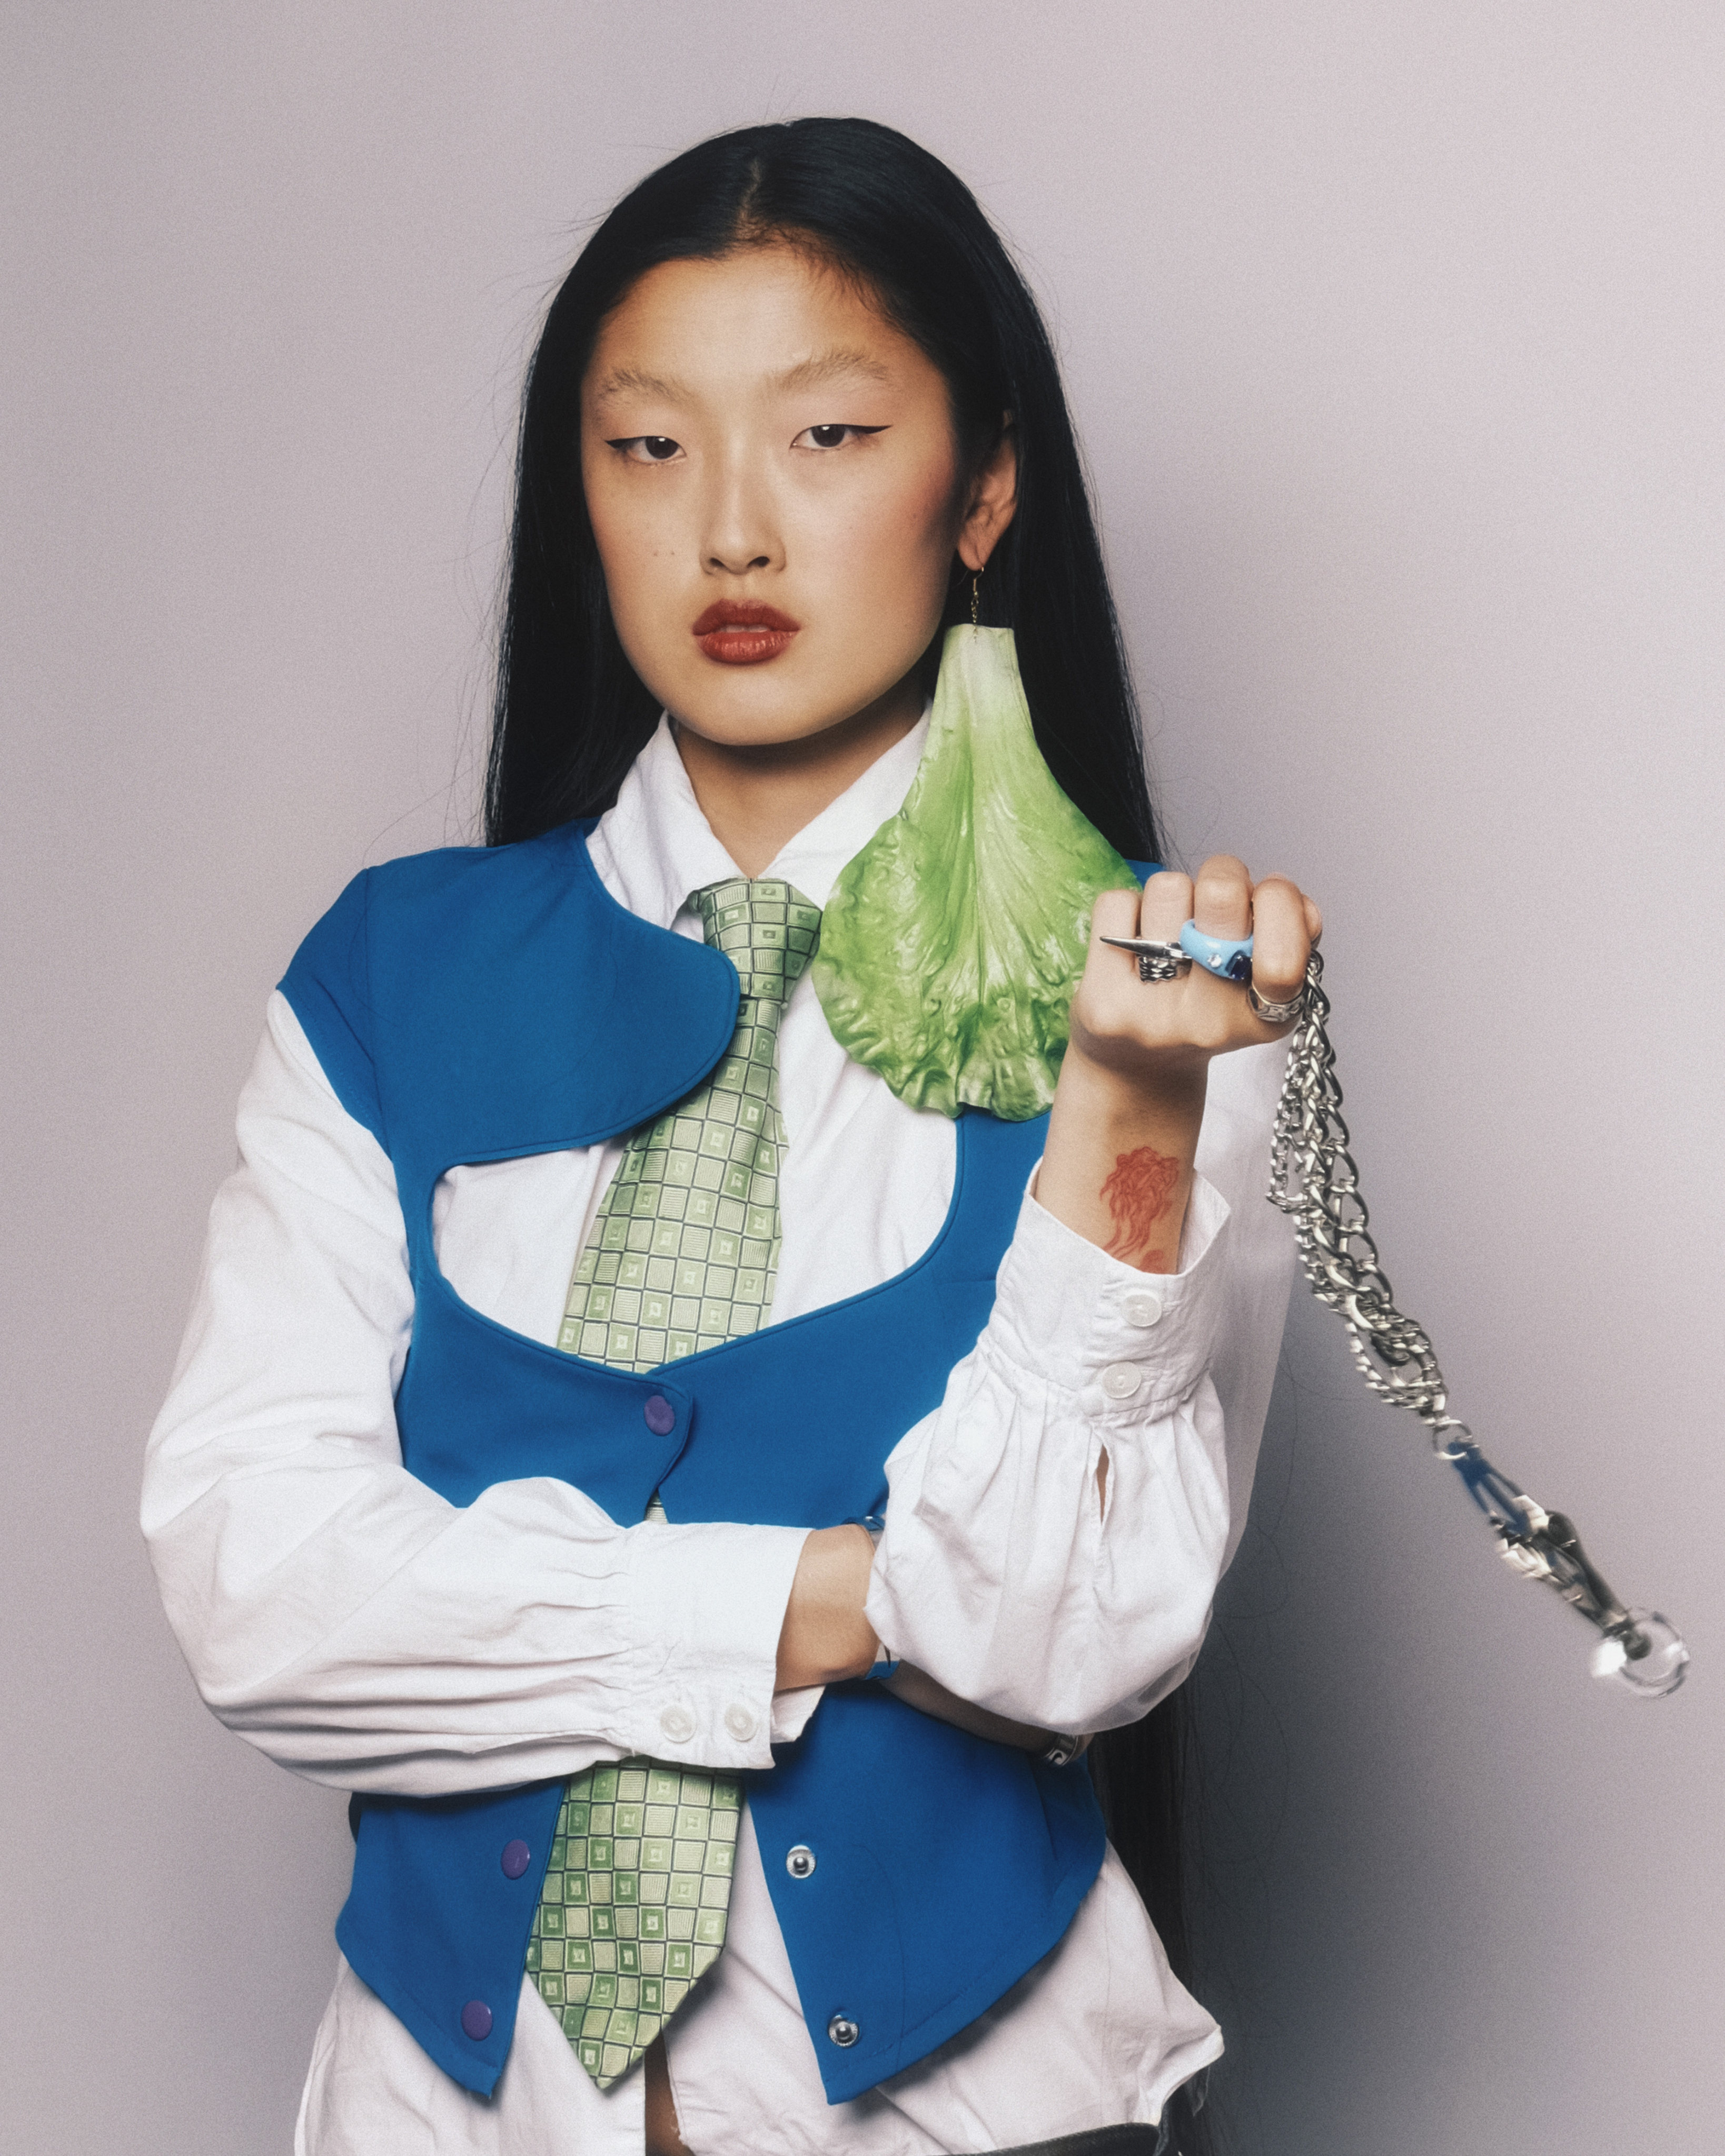 An image from the collaborative photoshoot between alternative Asian music label Eastern Margins and fashion brands Lu’u Dan and Ala Tianan to mark the former’s East Asian tour. Photo: Minsett Hein 